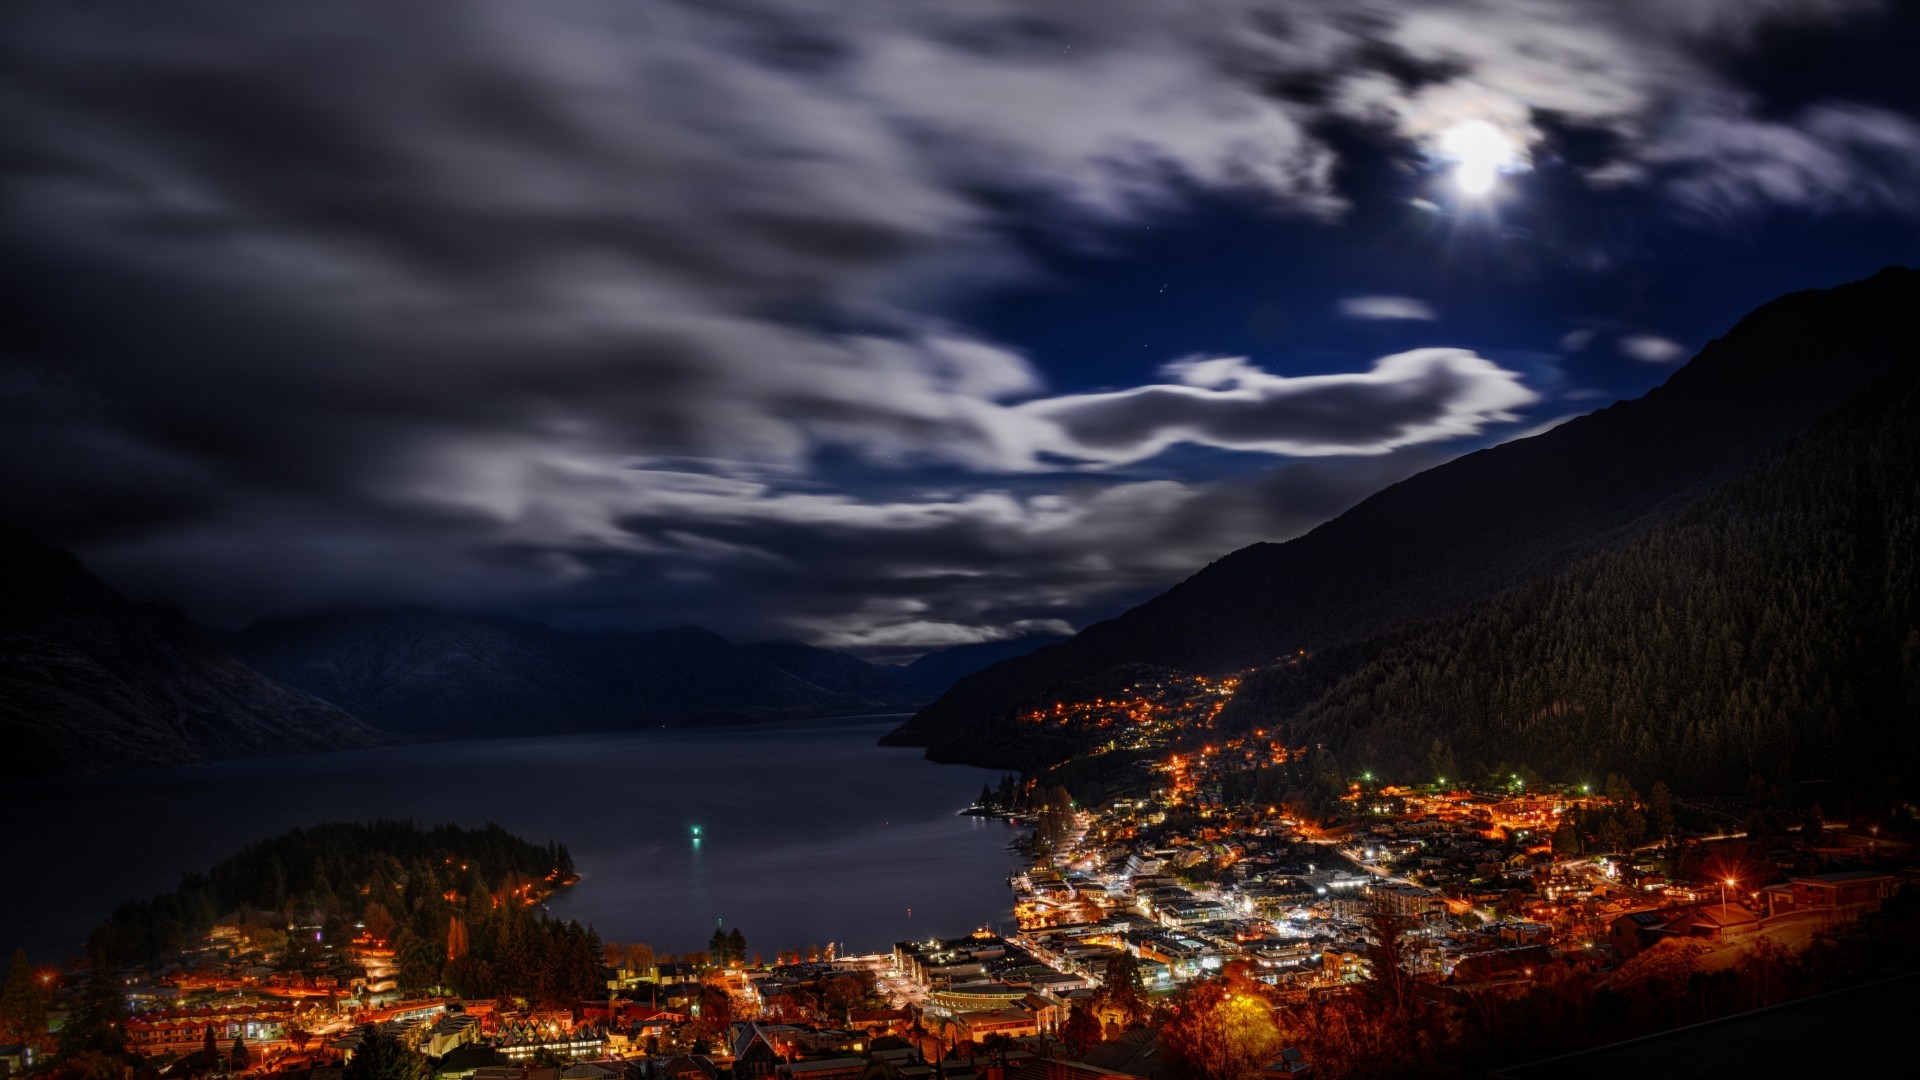 General 1920x1080 city cityscape night lights New Zealand landscape bay building trees forest hills clouds long exposure moonlight city lights